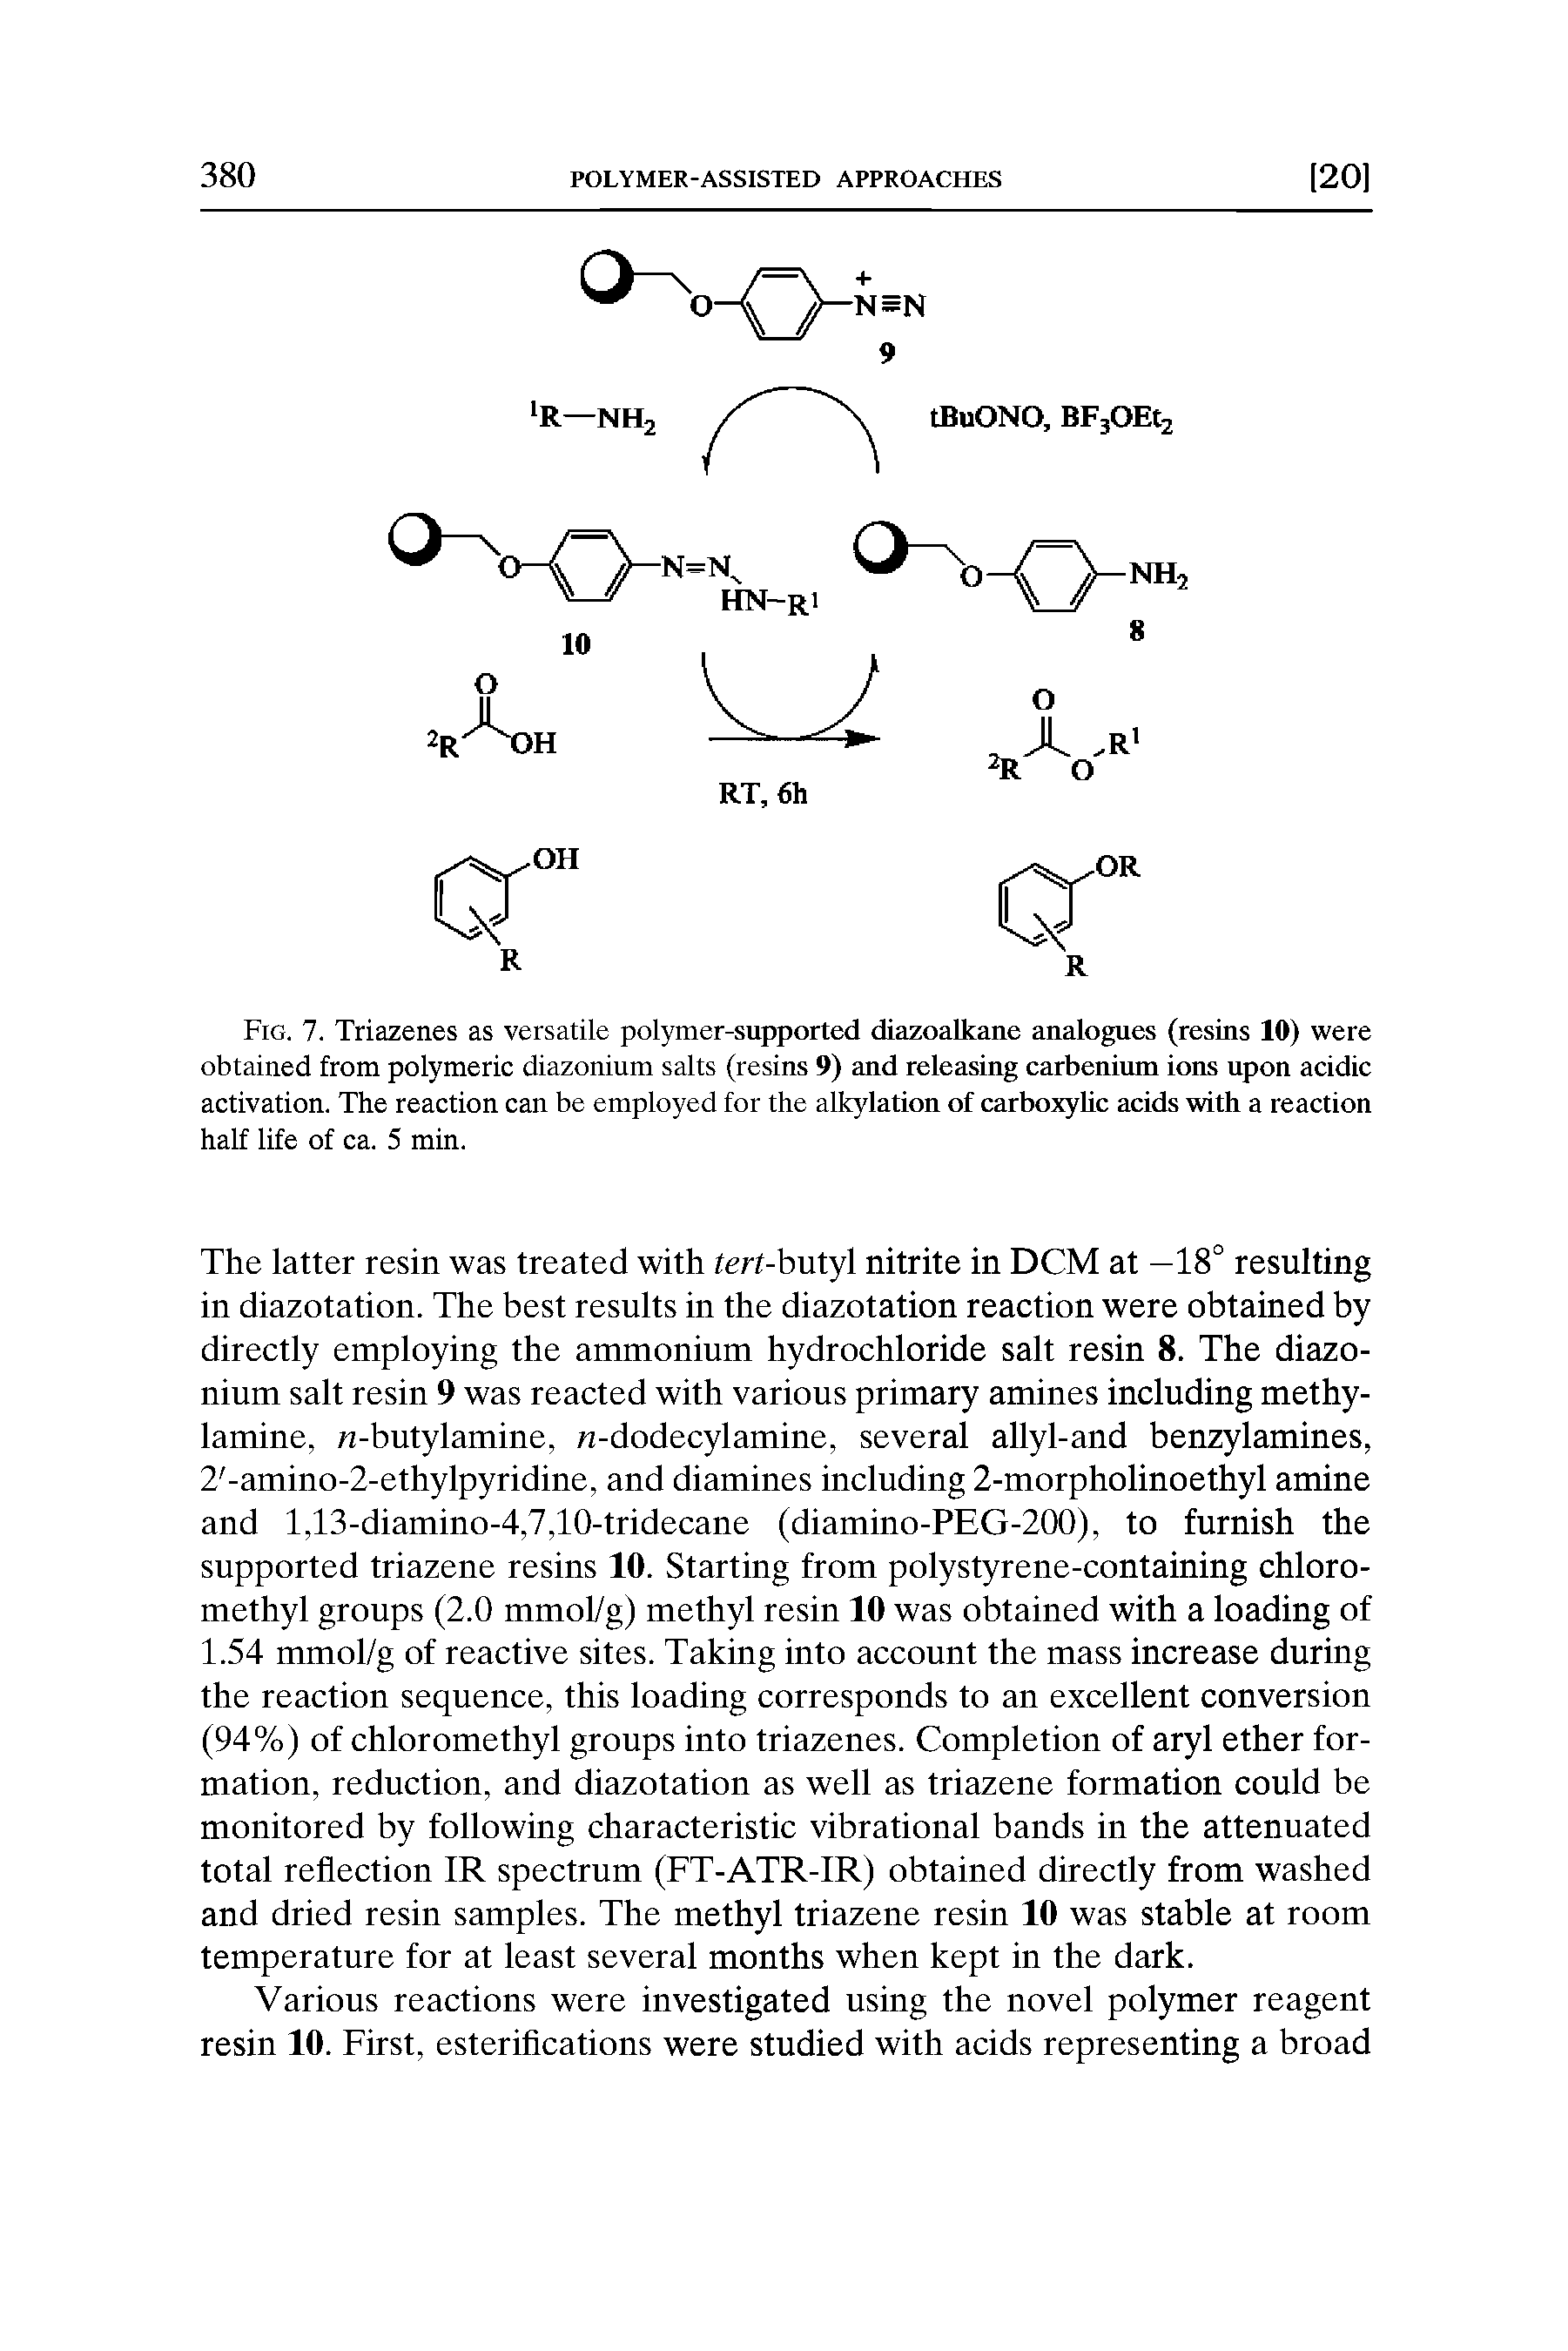 Fig. 7. Triazenes as versatile polymer-supported diazoalkane analogues (resins 10) were obtained from polymeric diazonium salts (resins 9) and releasing carbenium ions upon acidic activation. The reaction can be employed for the alkylation of carboxylic acids with a reaction half life of ca. 5 min.